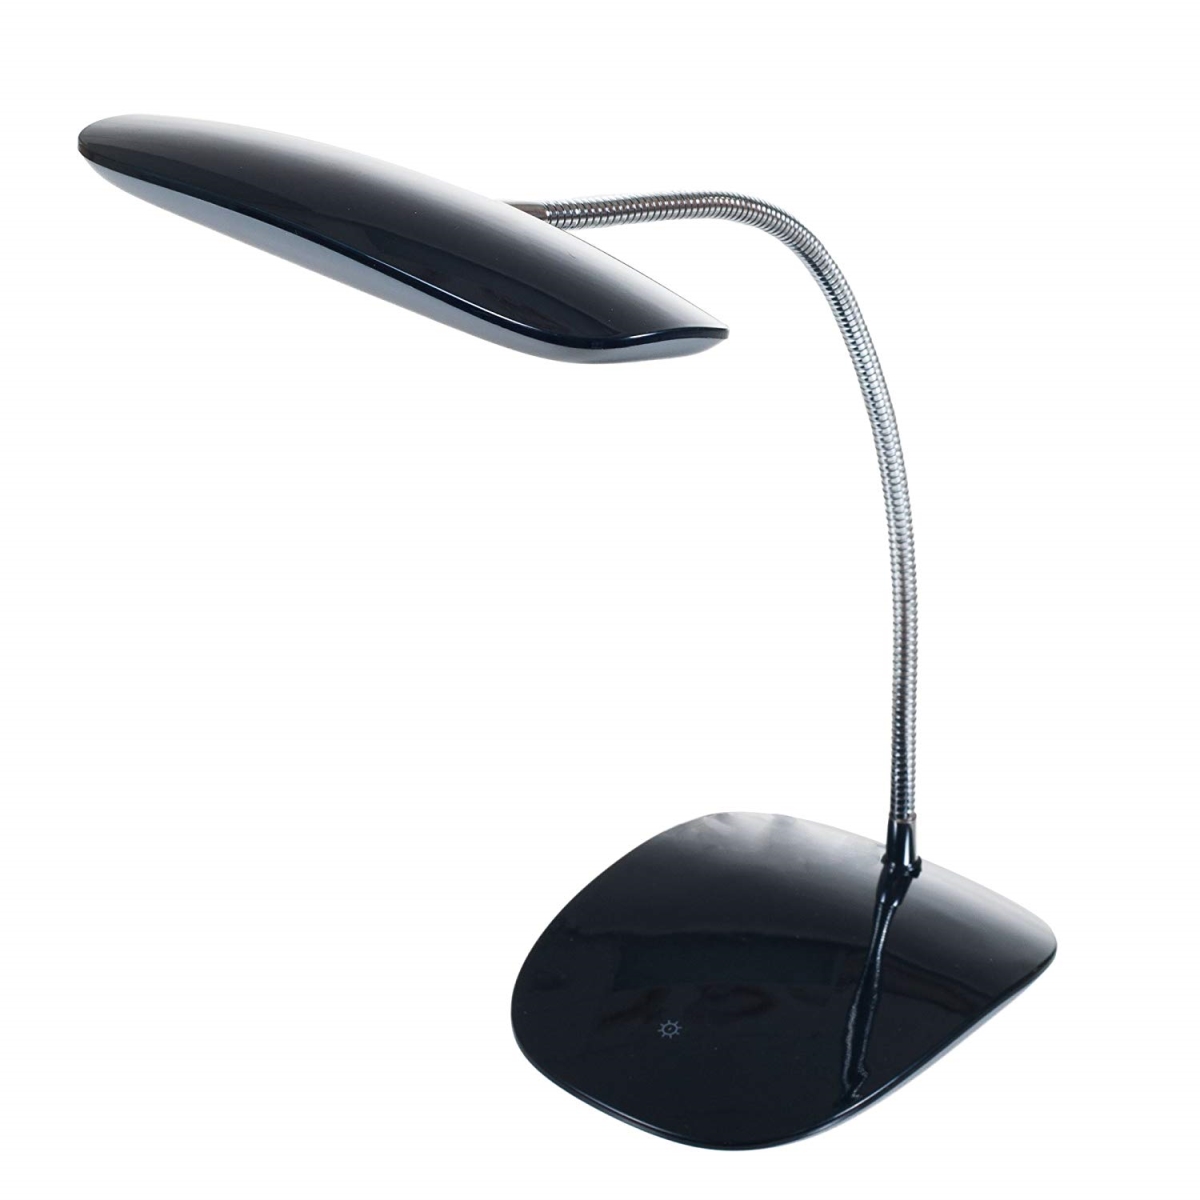 72-sl159b-a Touch Activated Led Usb Desk Lamp, Black - 6.5 X 7.75 X 18 In.